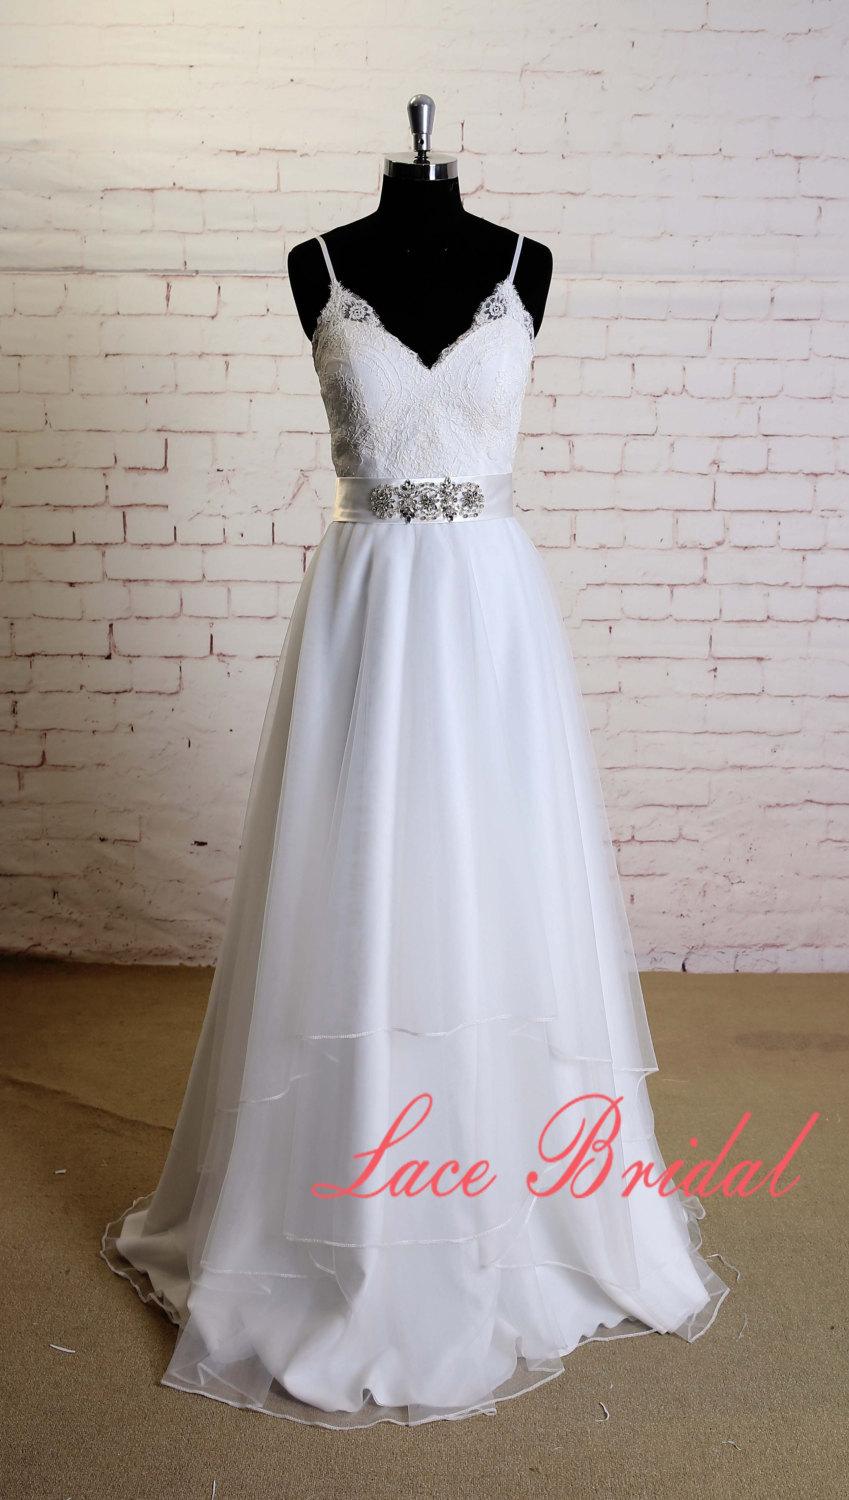 Mariage - Soft Layered Tulle Skirt Wedding Dress with Spaghetti Straps Classic Lace Bodice Bridal Gown with Beading Sash